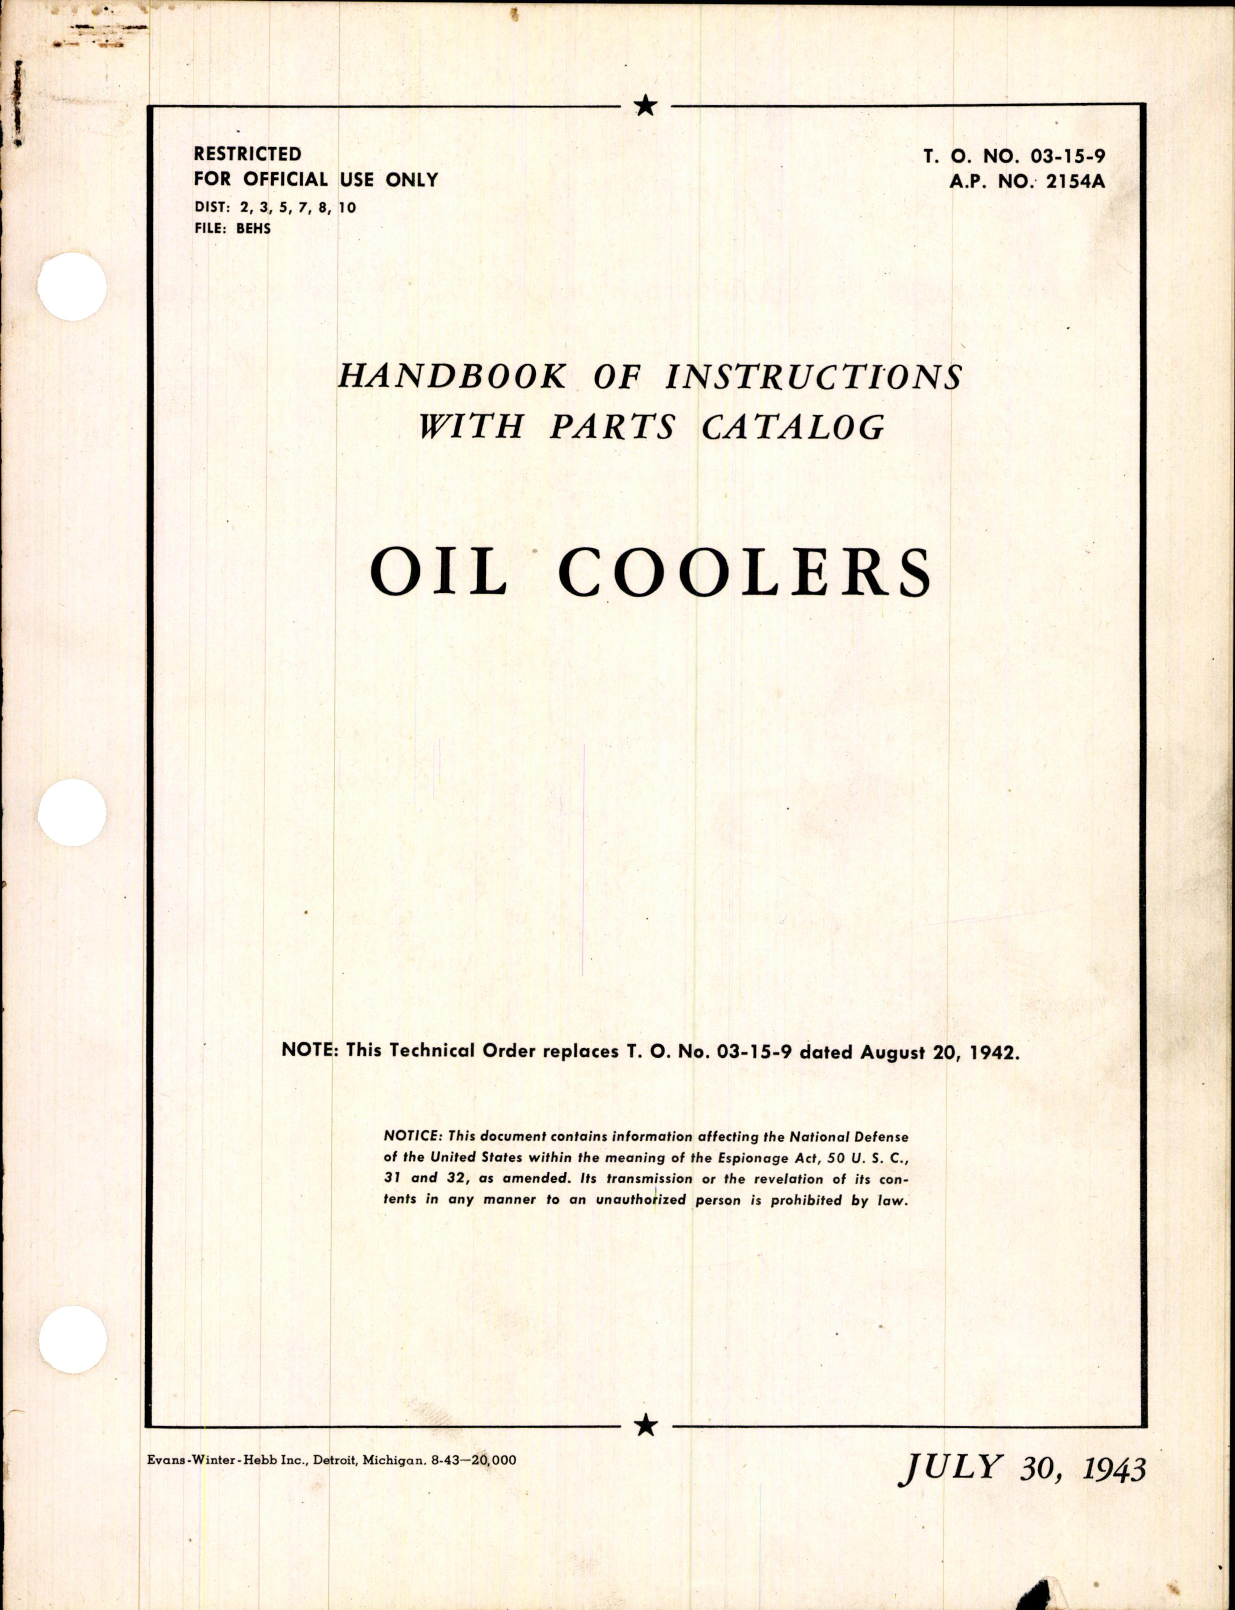 Sample page 1 from AirCorps Library document: Instructions with Parts Catalog for Oil Coolers